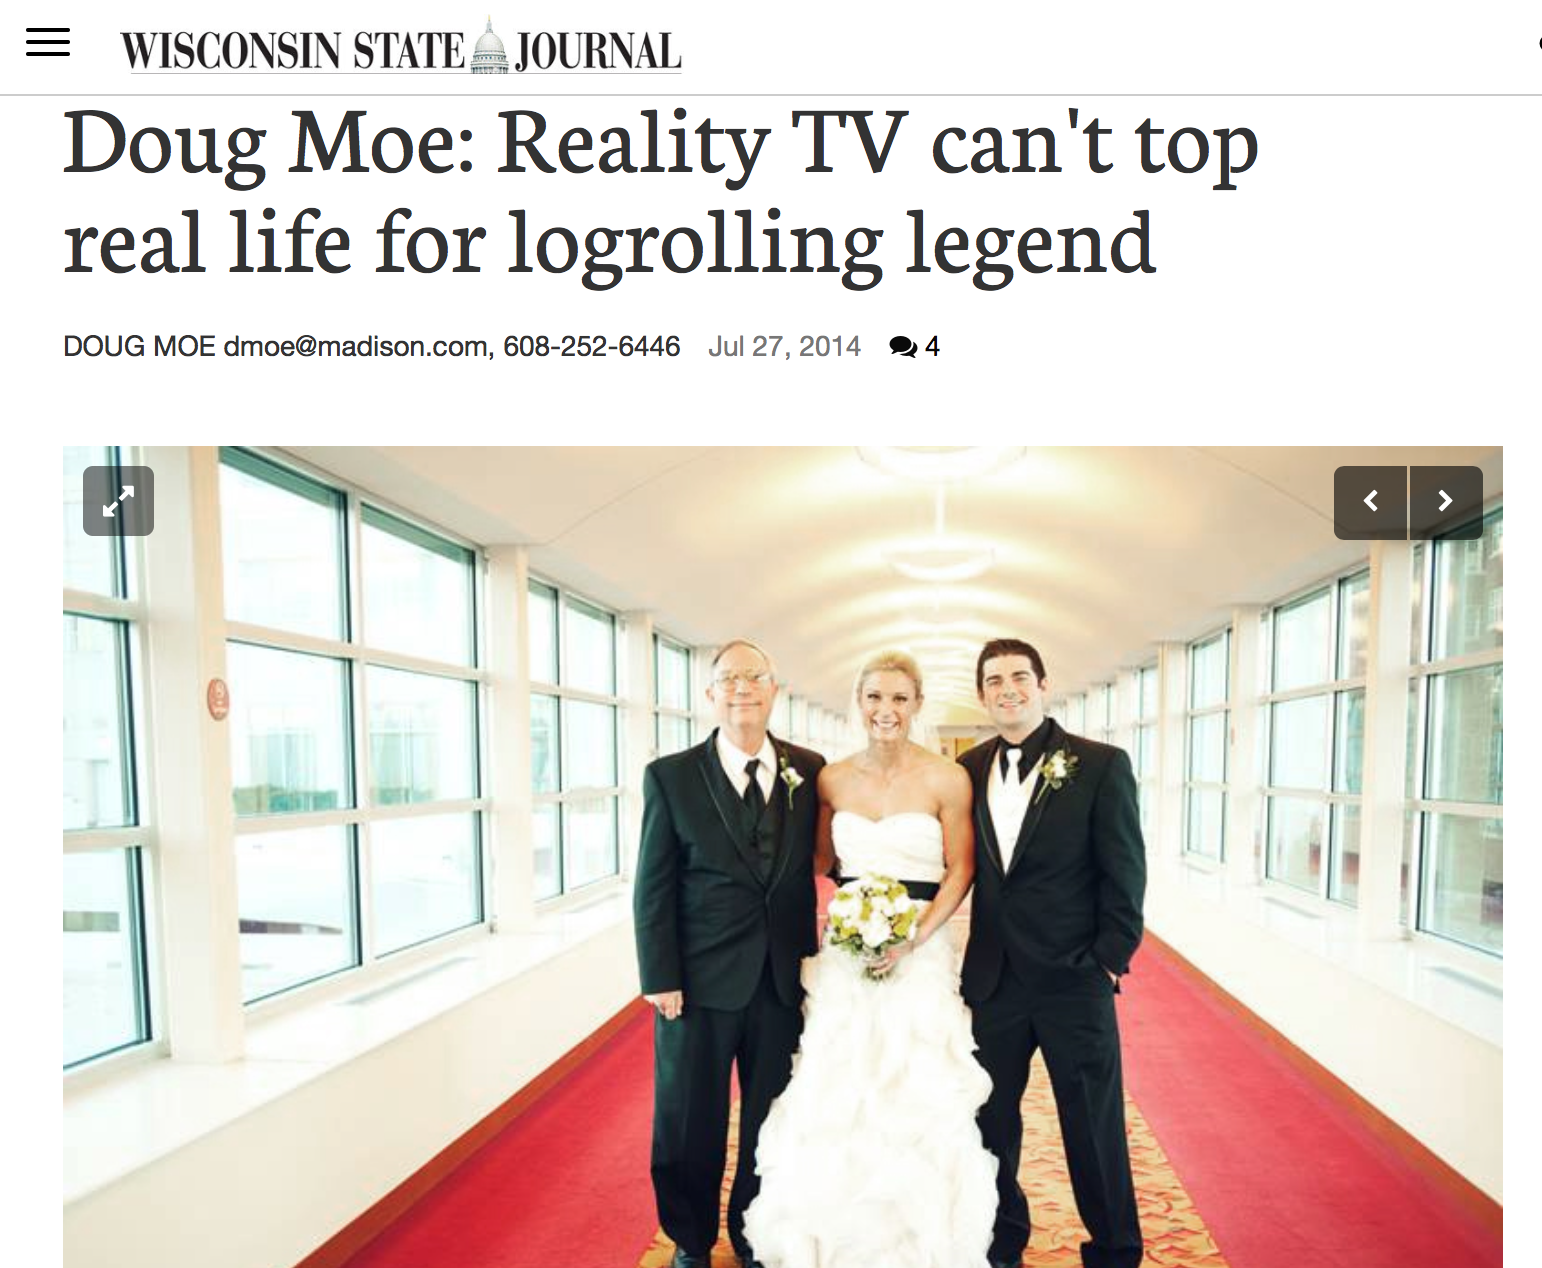 Reality TV Can’t Top Real Life for Log Rolling Legend: Wisconsin State Journal 2014